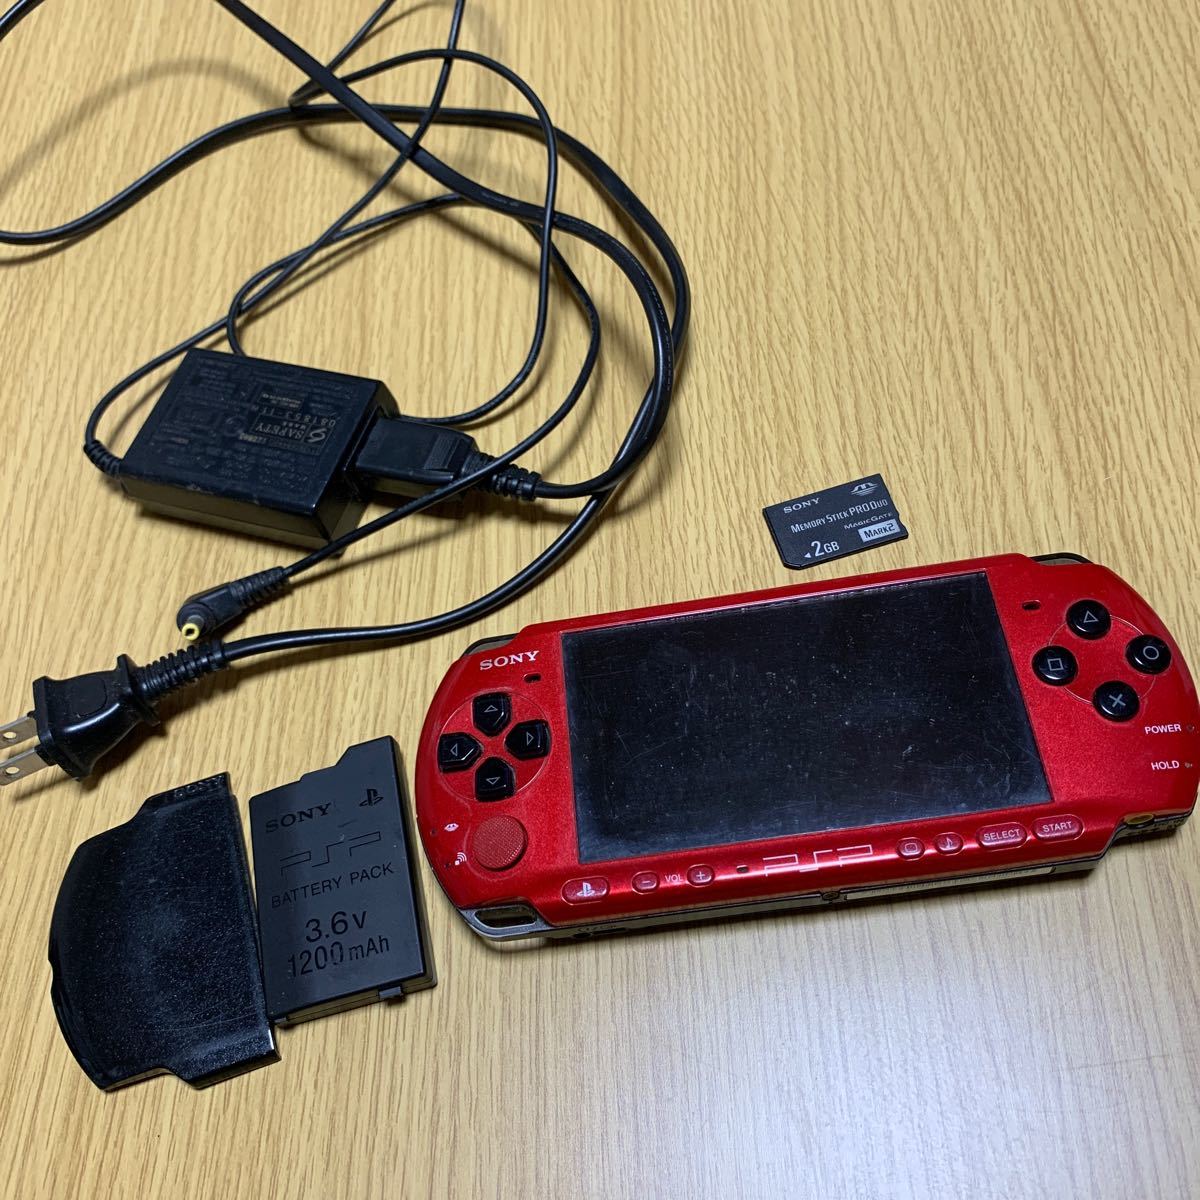 PayPayフリマ｜PSP-3000MHB 新品ソフト＆バッテリー 保護フィルム付 